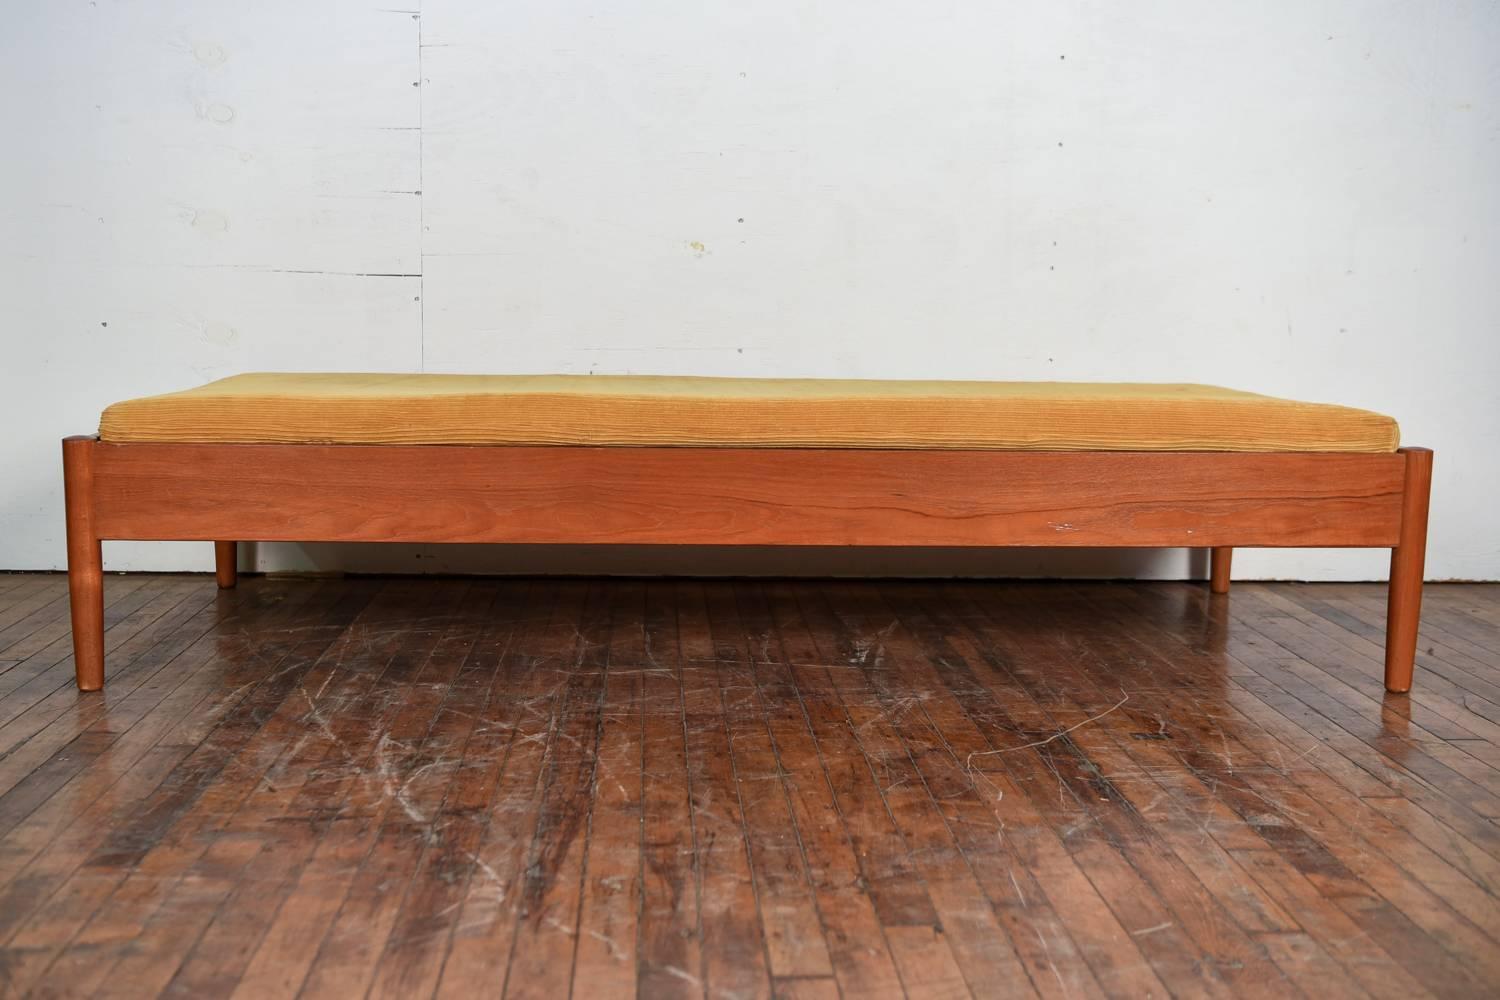 A Danish midcentury daybed with a wonderful teak frame sitting upon rounded legs. This would be a fabulous piece for reclining and relaxing upon. The cushion could be reupholstered in a desired fabric, giving it the potential to be transformed